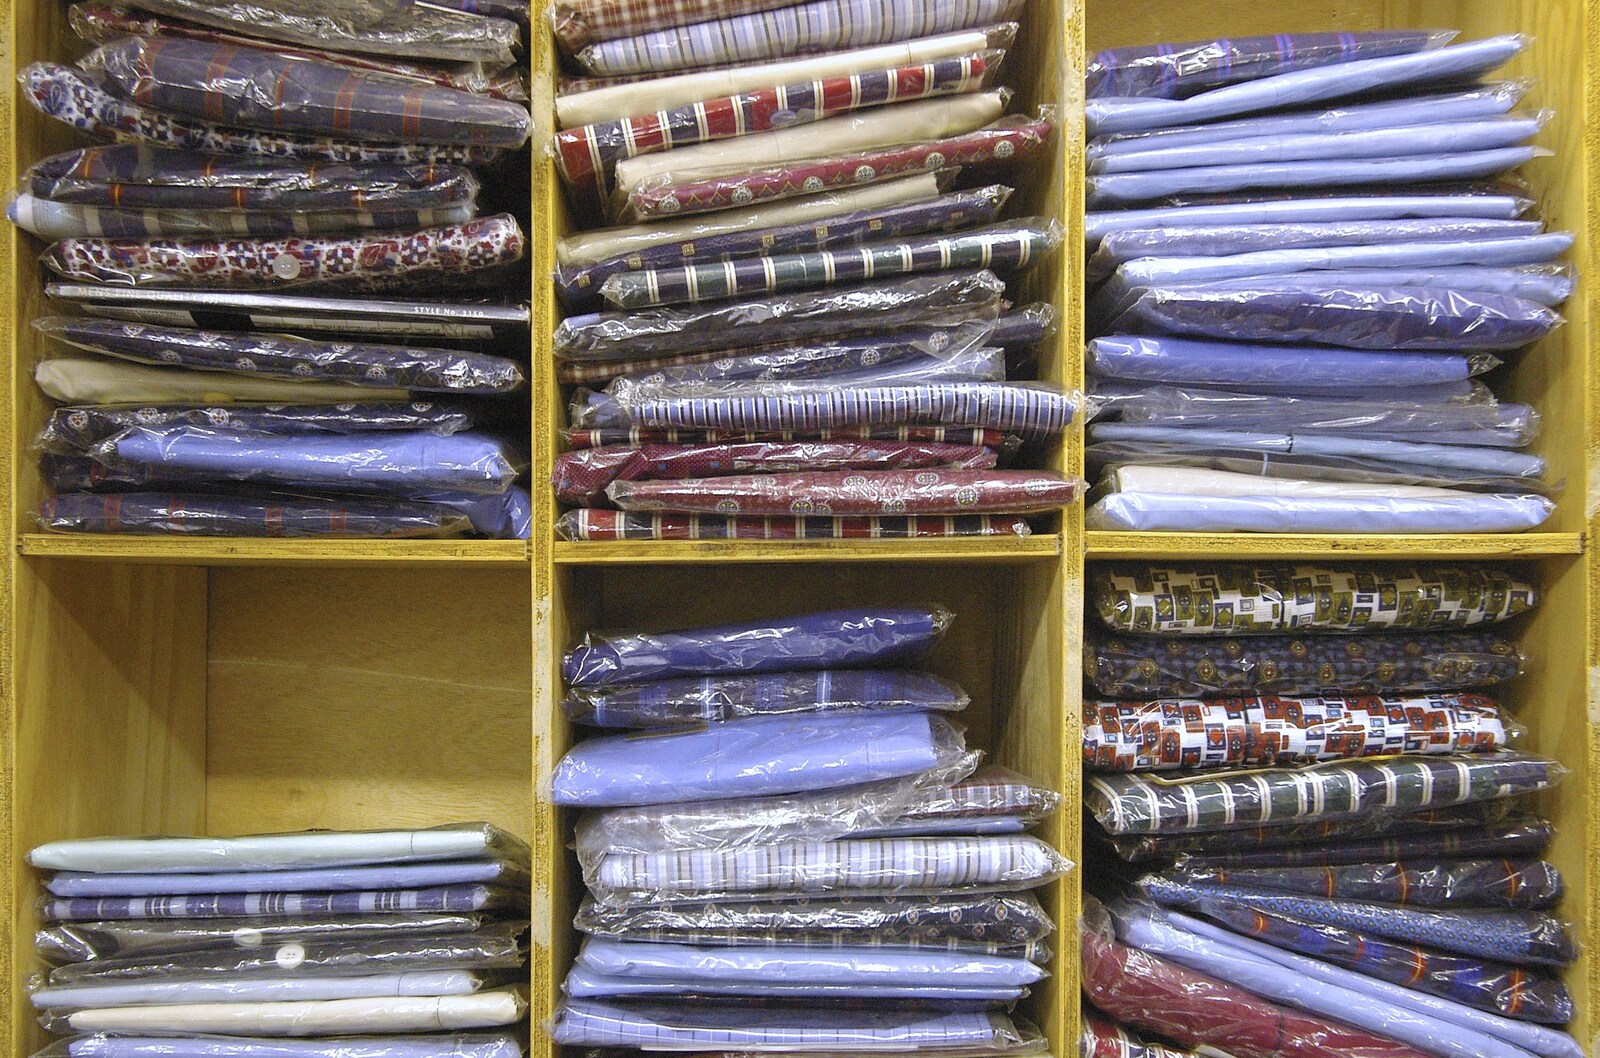 Stacks of shirts from A Portrait of Hopgoods: Gentlemen's Outfitters, Diss, Norfolk - 4th January 2006